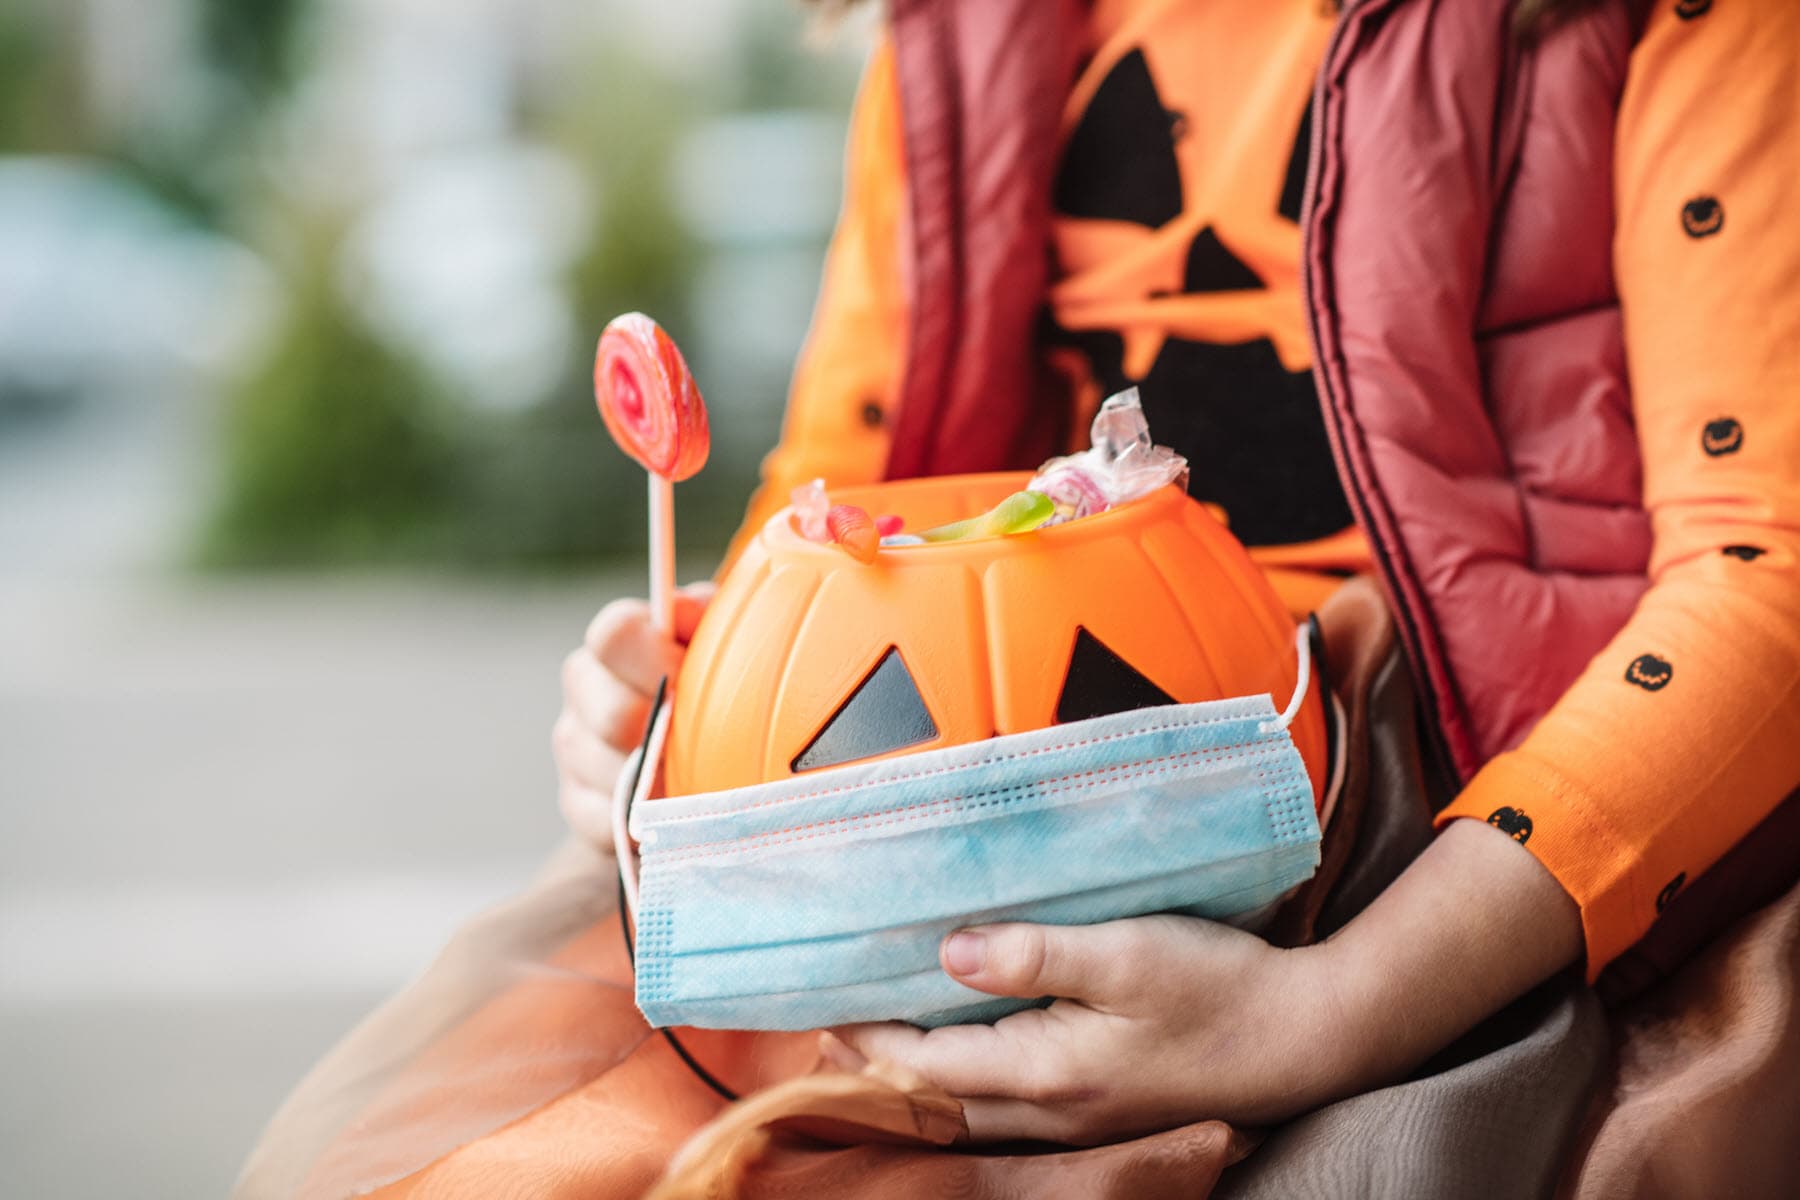 CDC Director Encourages Halloween Trick-or-Treating